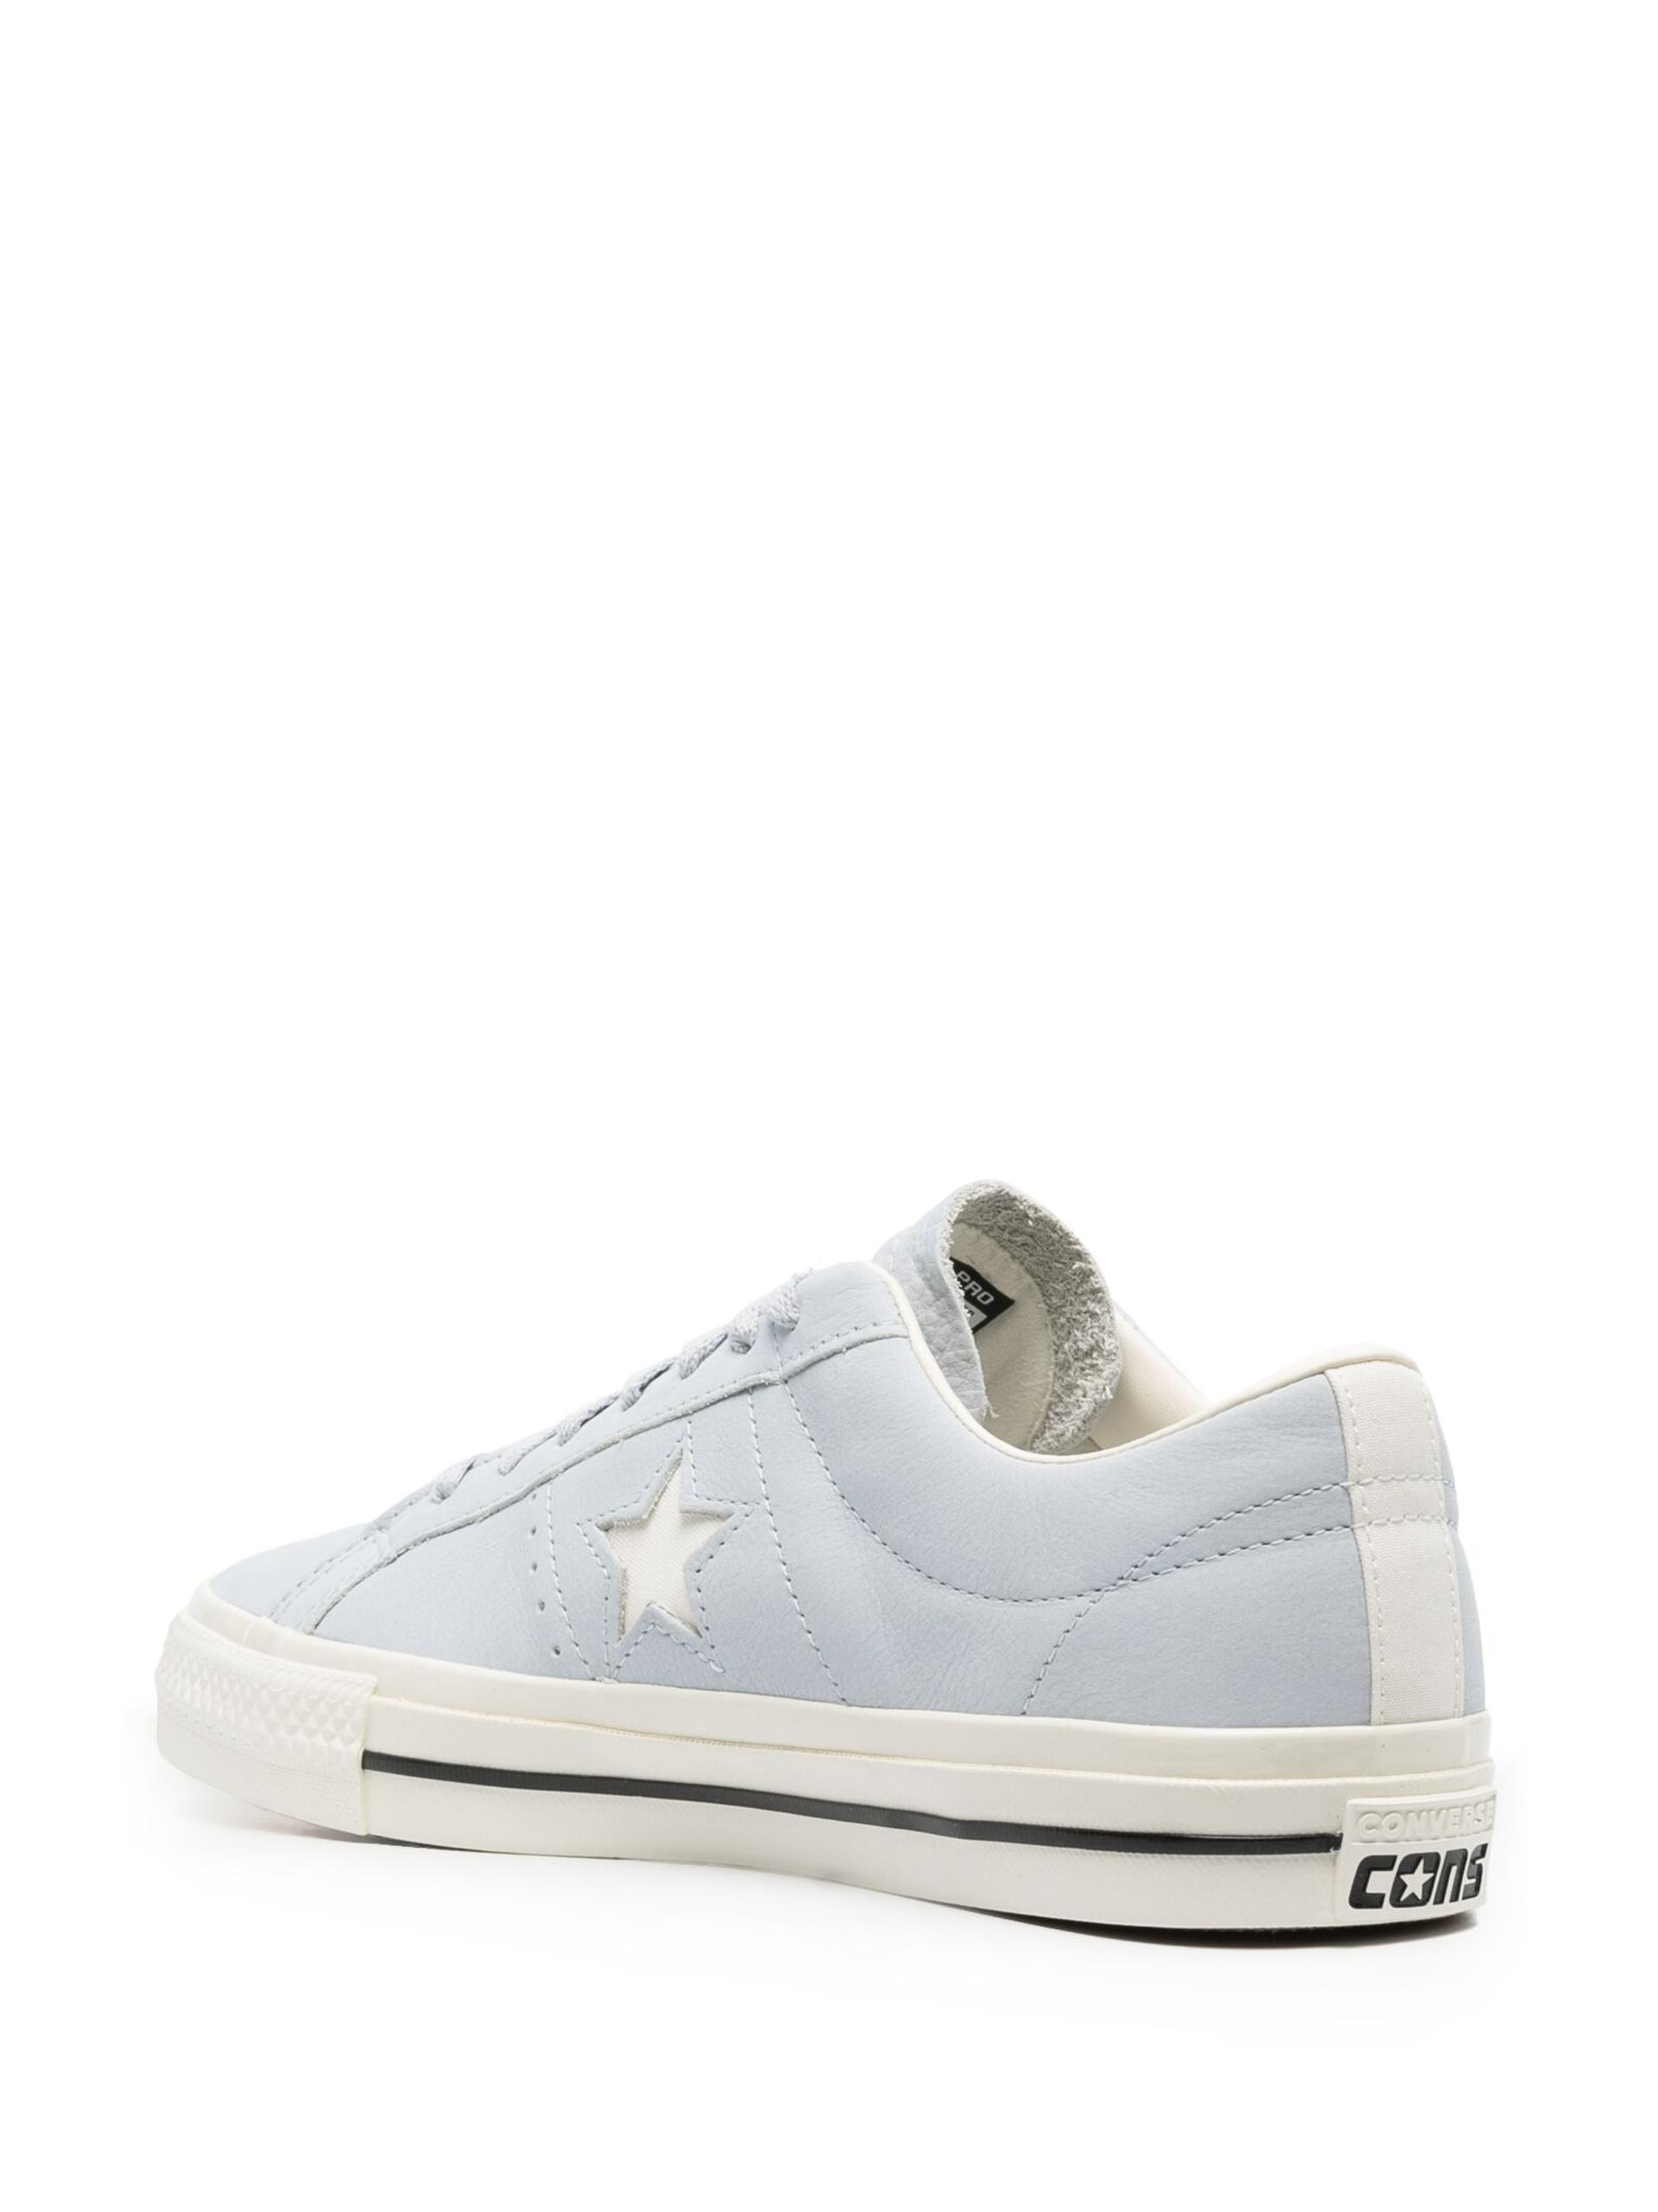 Converse One Star Pro Leather Sneakers in White | Lyst